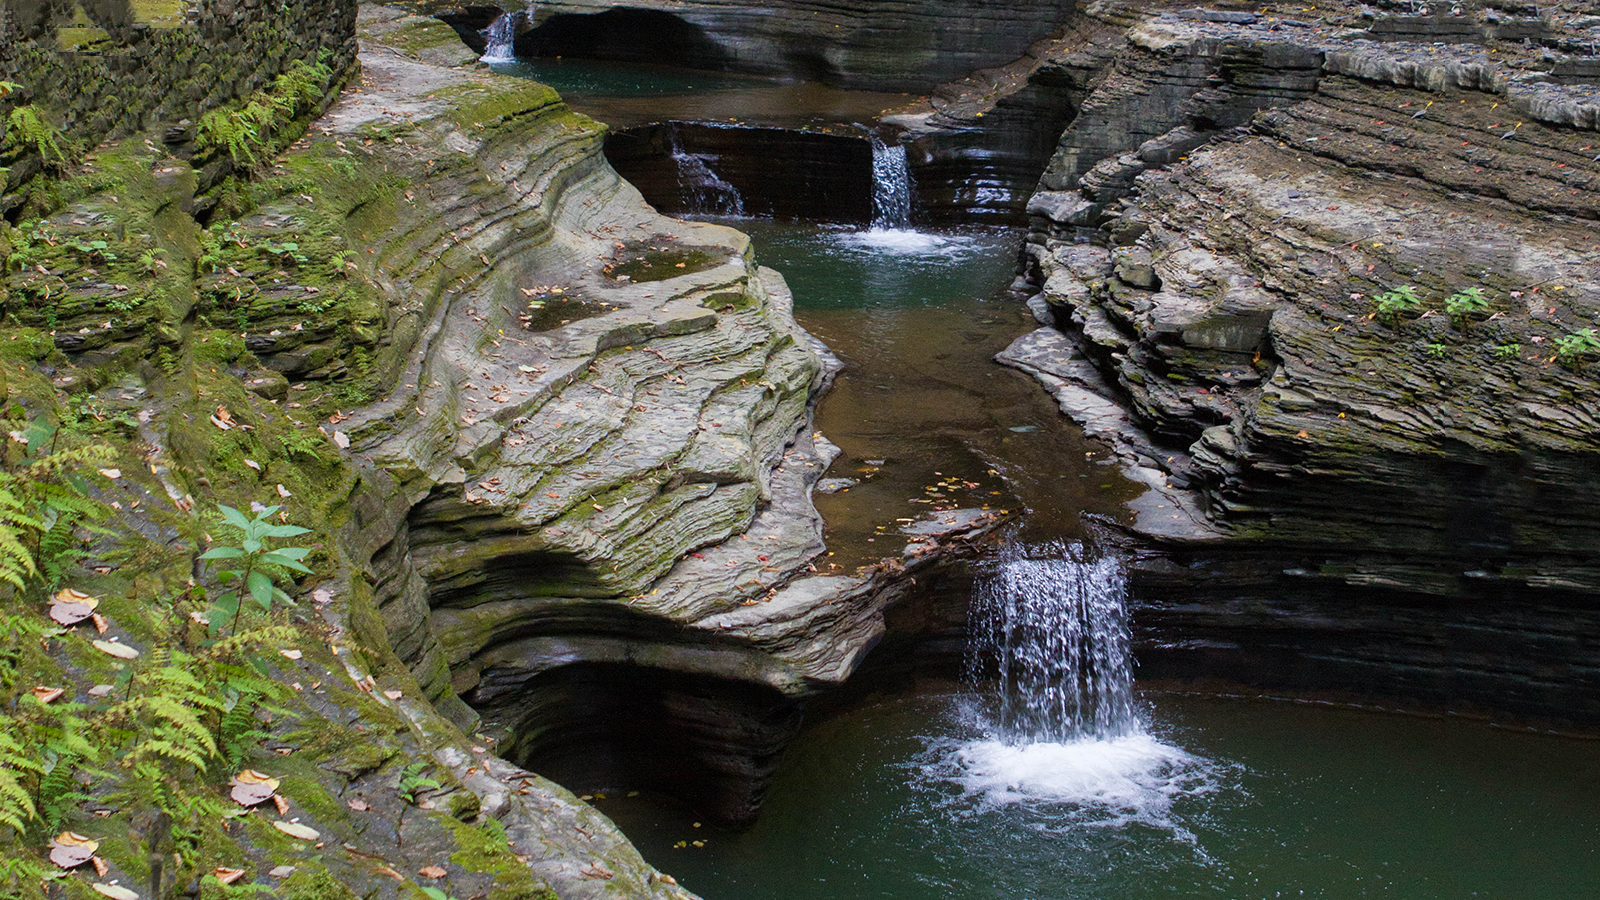 Water pool with waterfall in Watkins Glen, a must visit when in the Finger Lakes with kids.